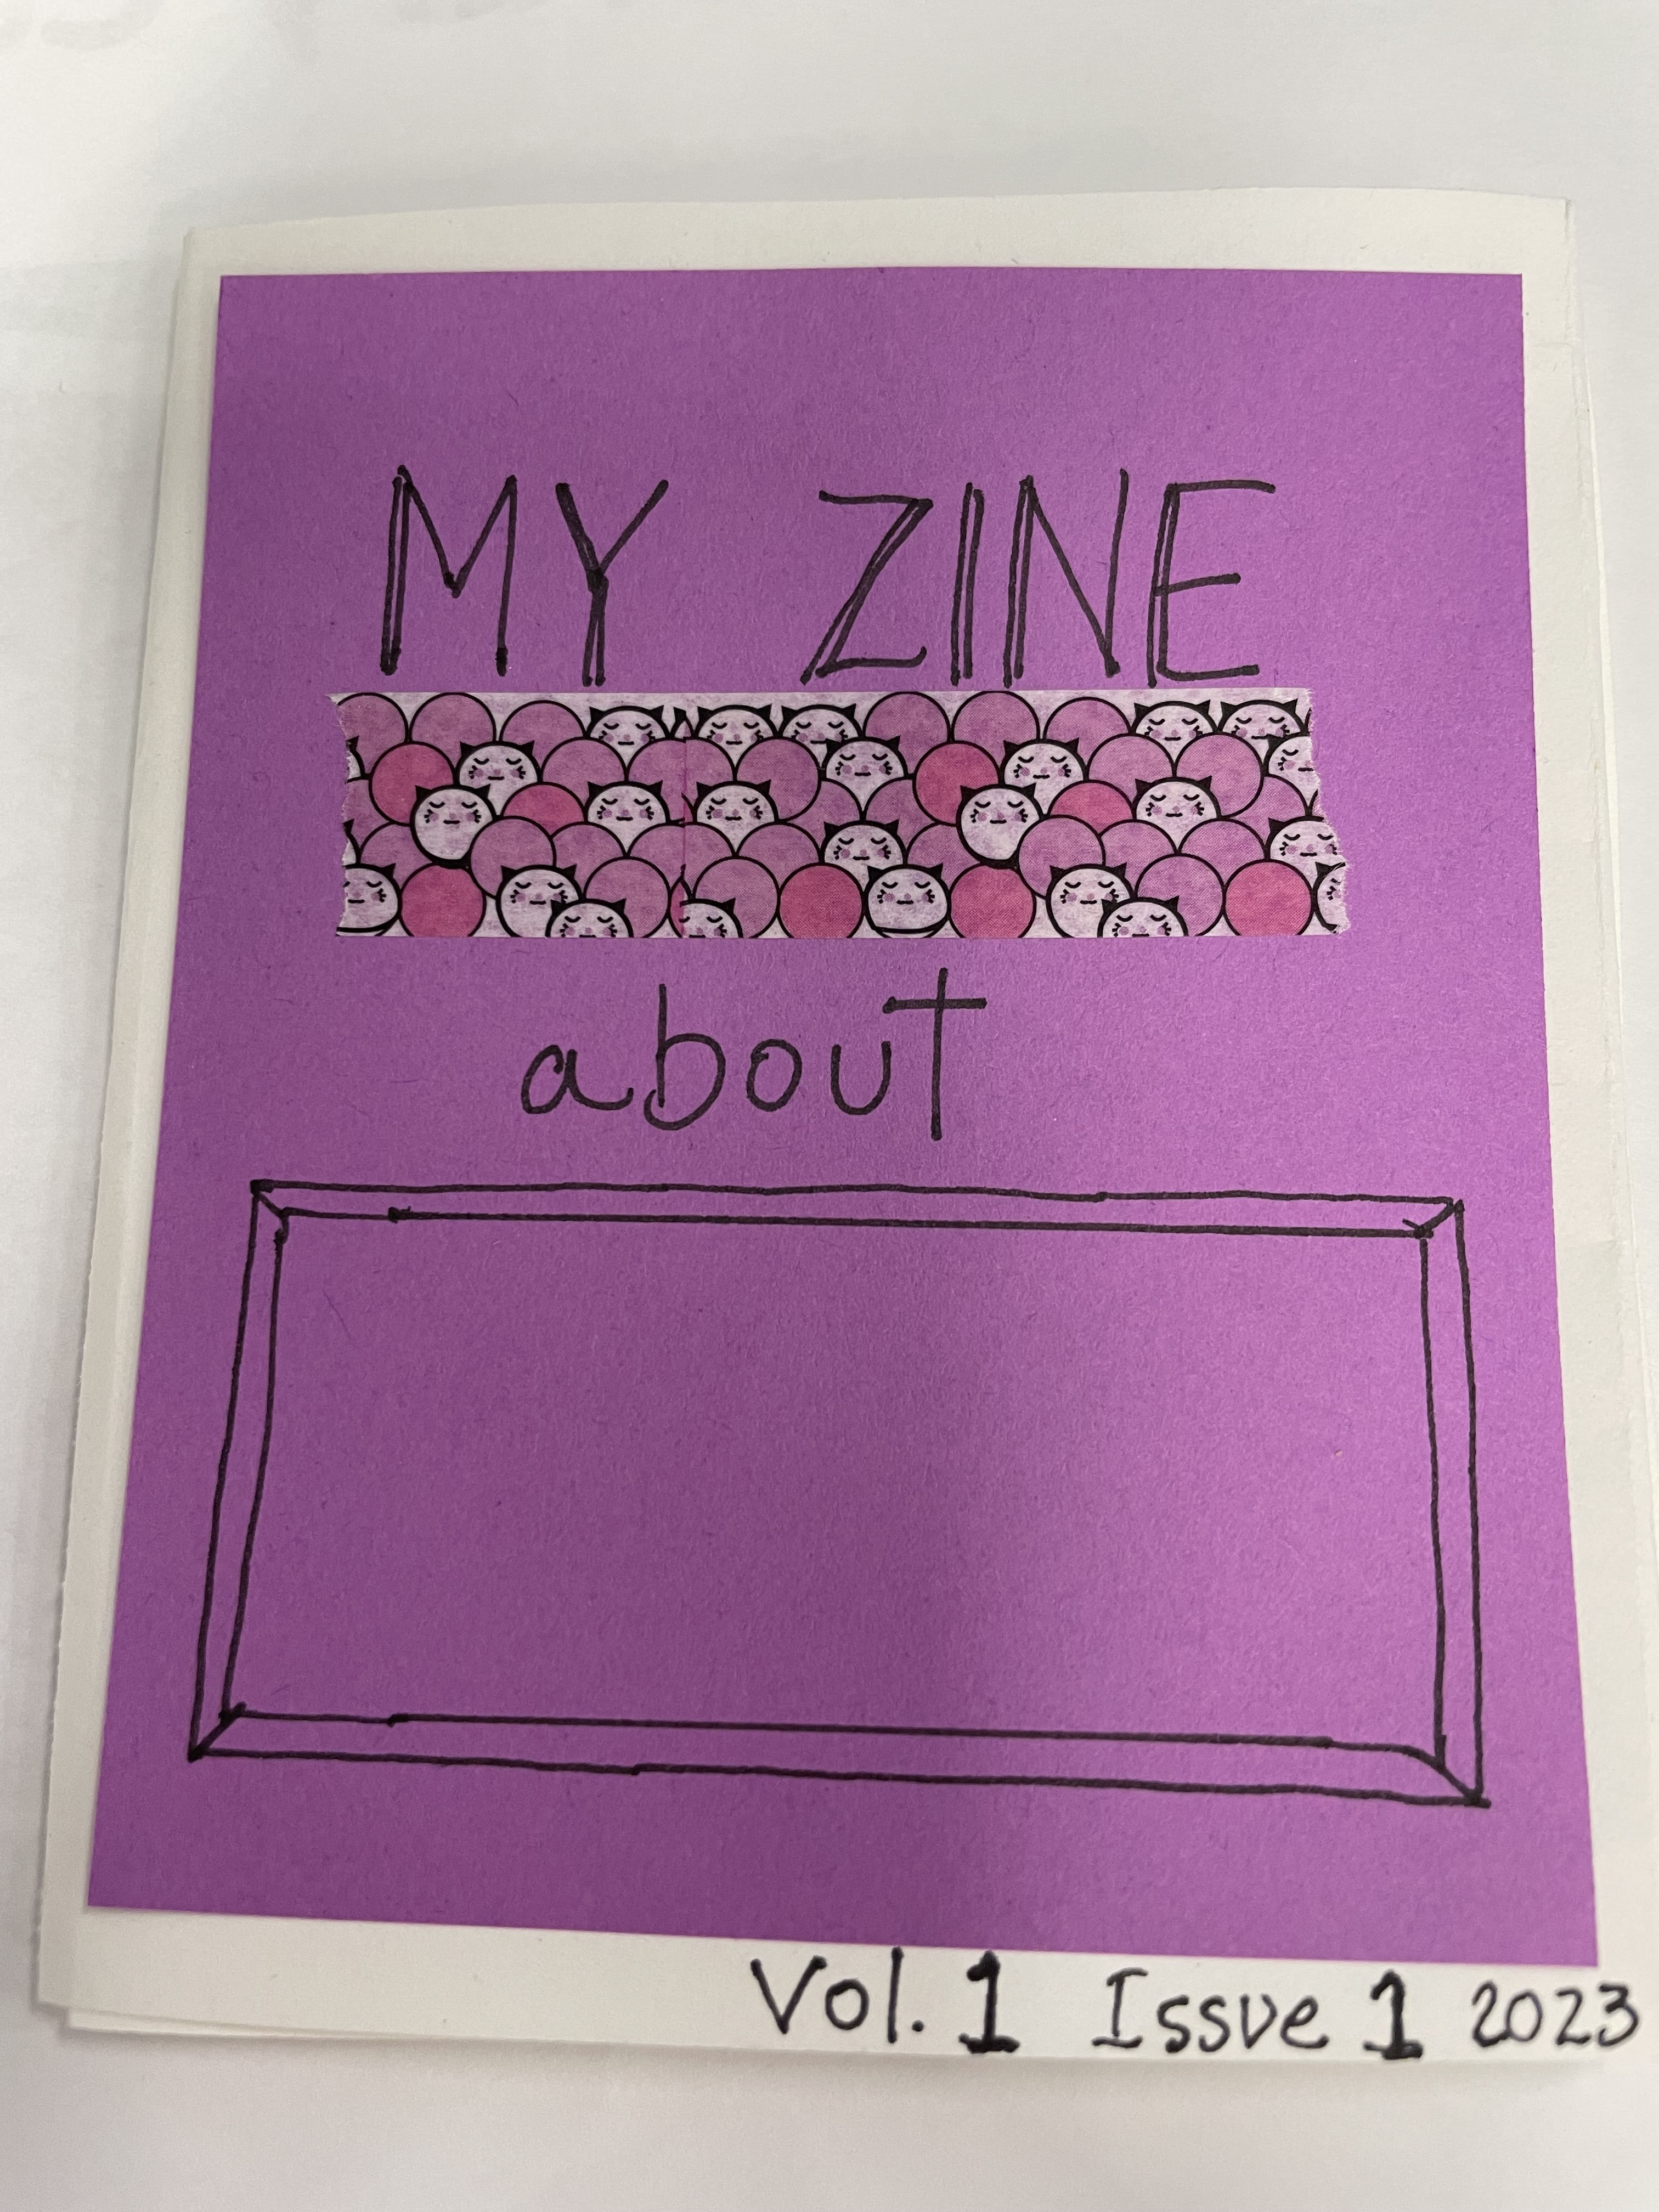 A 'zine' homemade magazine with a purple cover. Text: My zine about _____